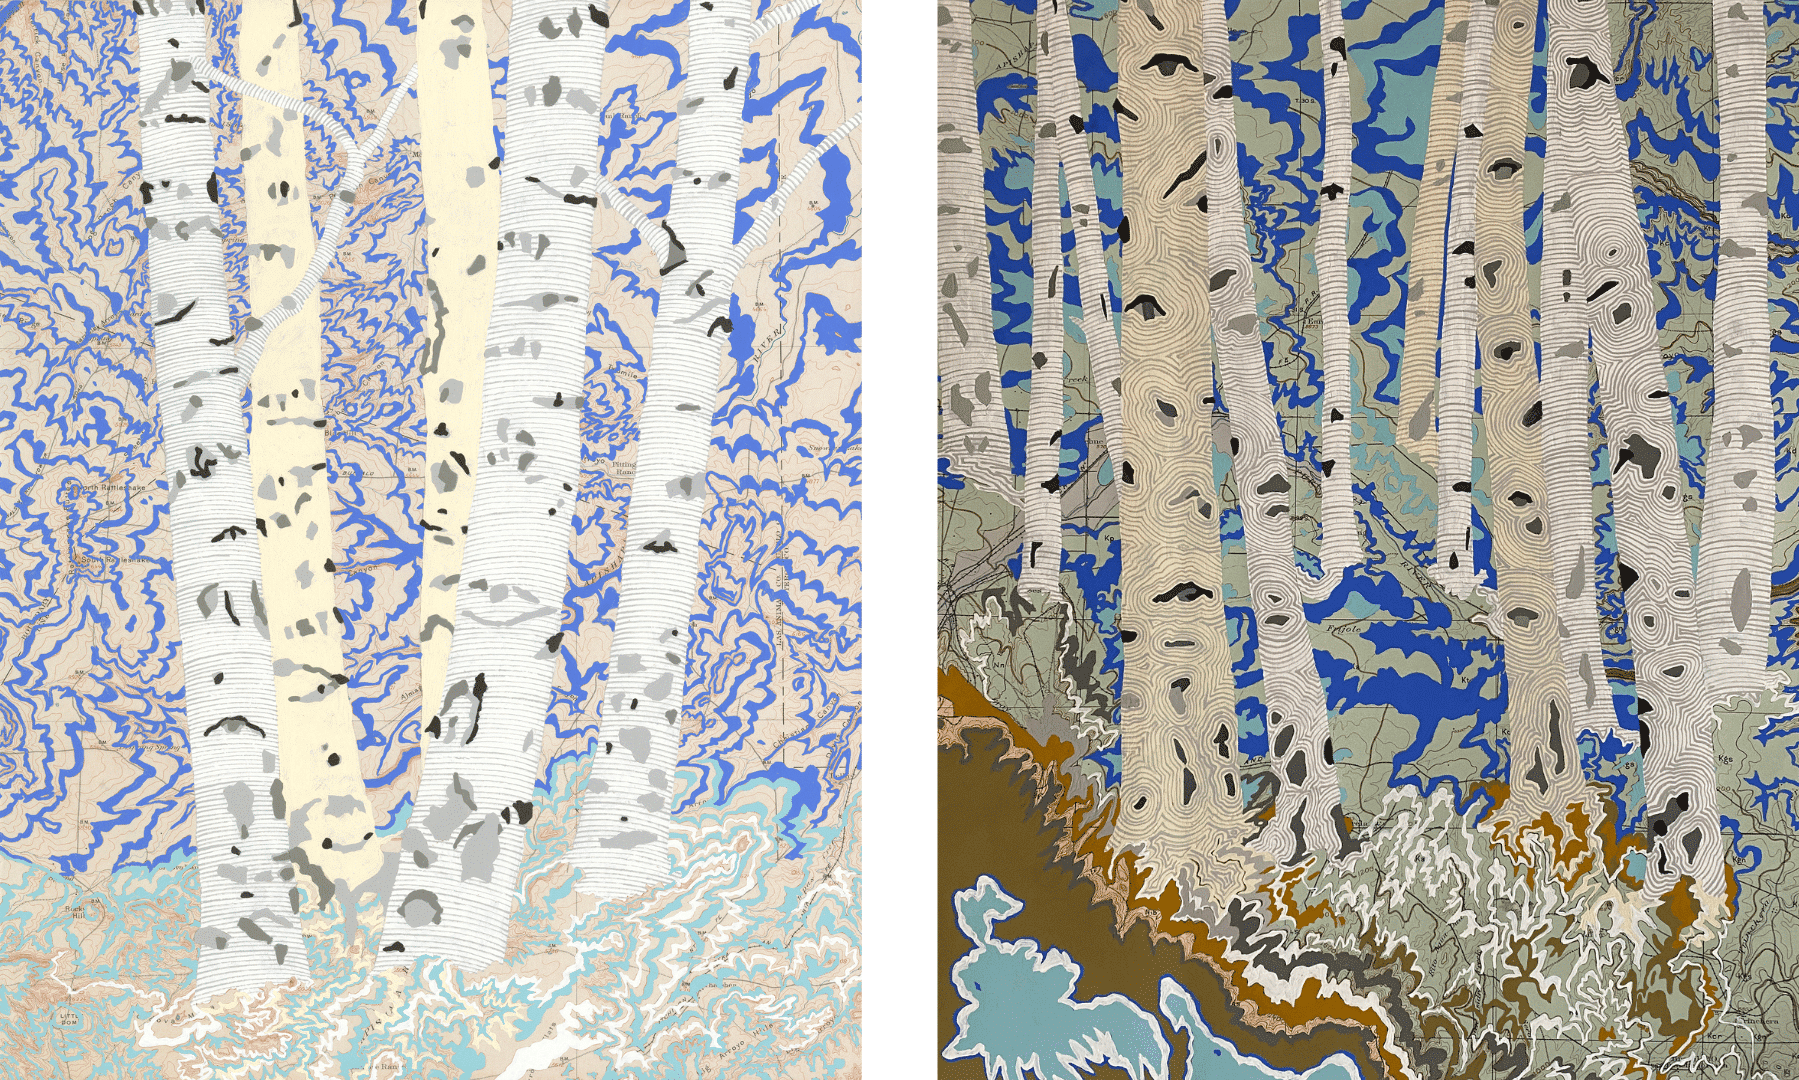 Two paintings of trees over a map; the rivers on the map have all been painted a deeper blue.